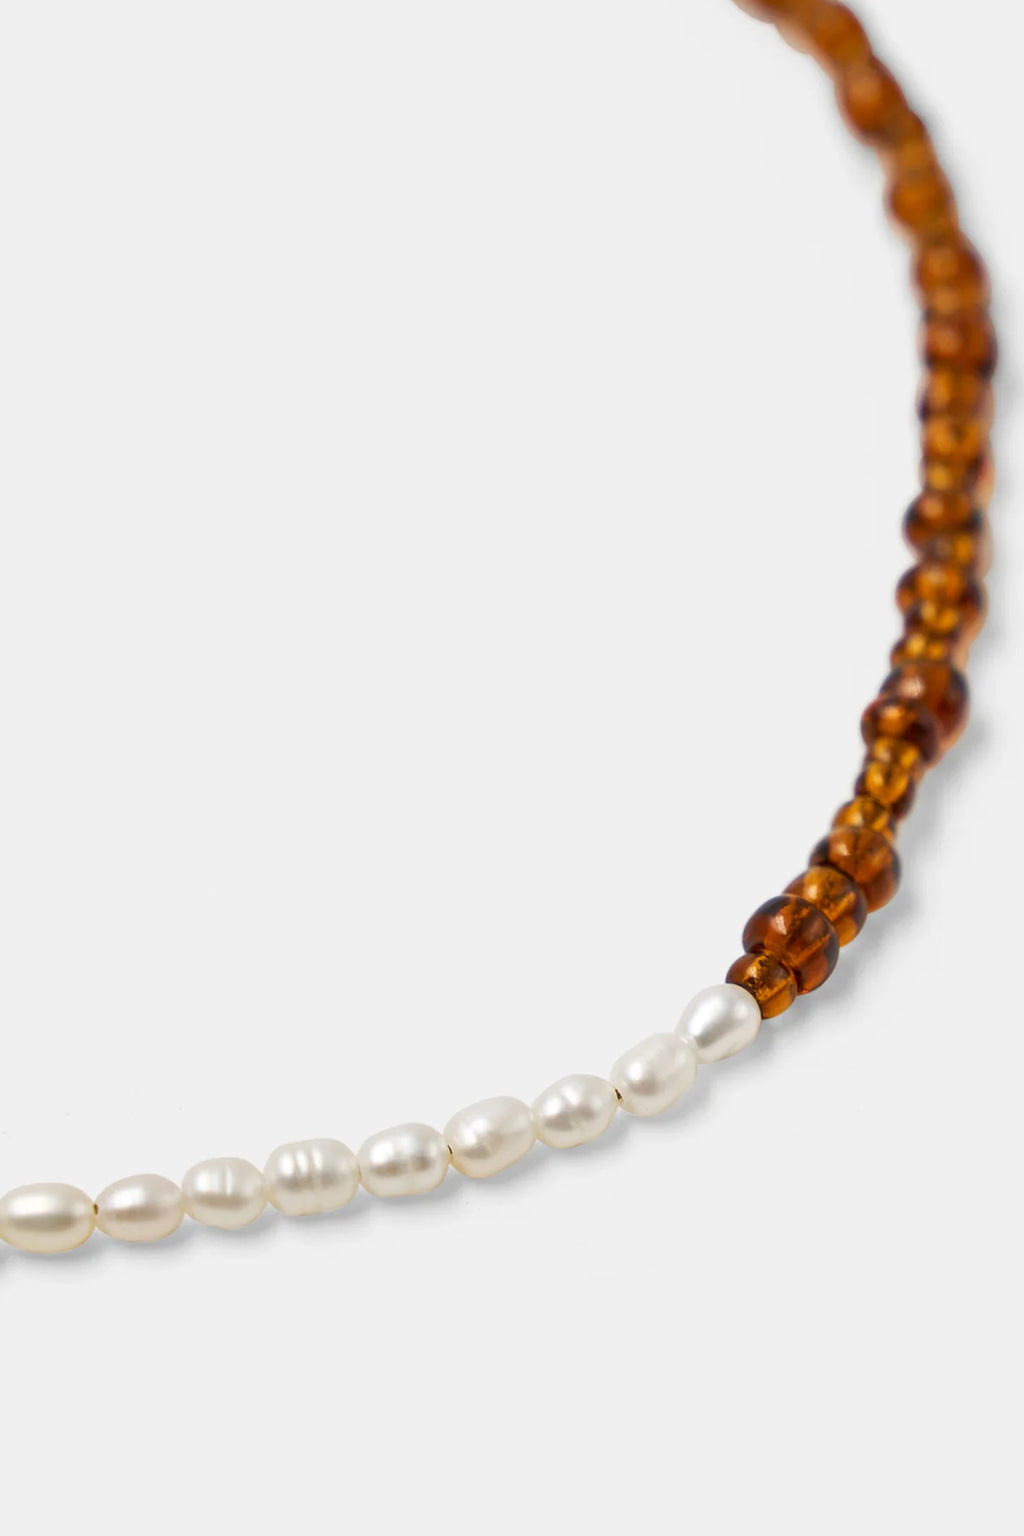 Brie Leon - Toffee Pearl Choker - Gold